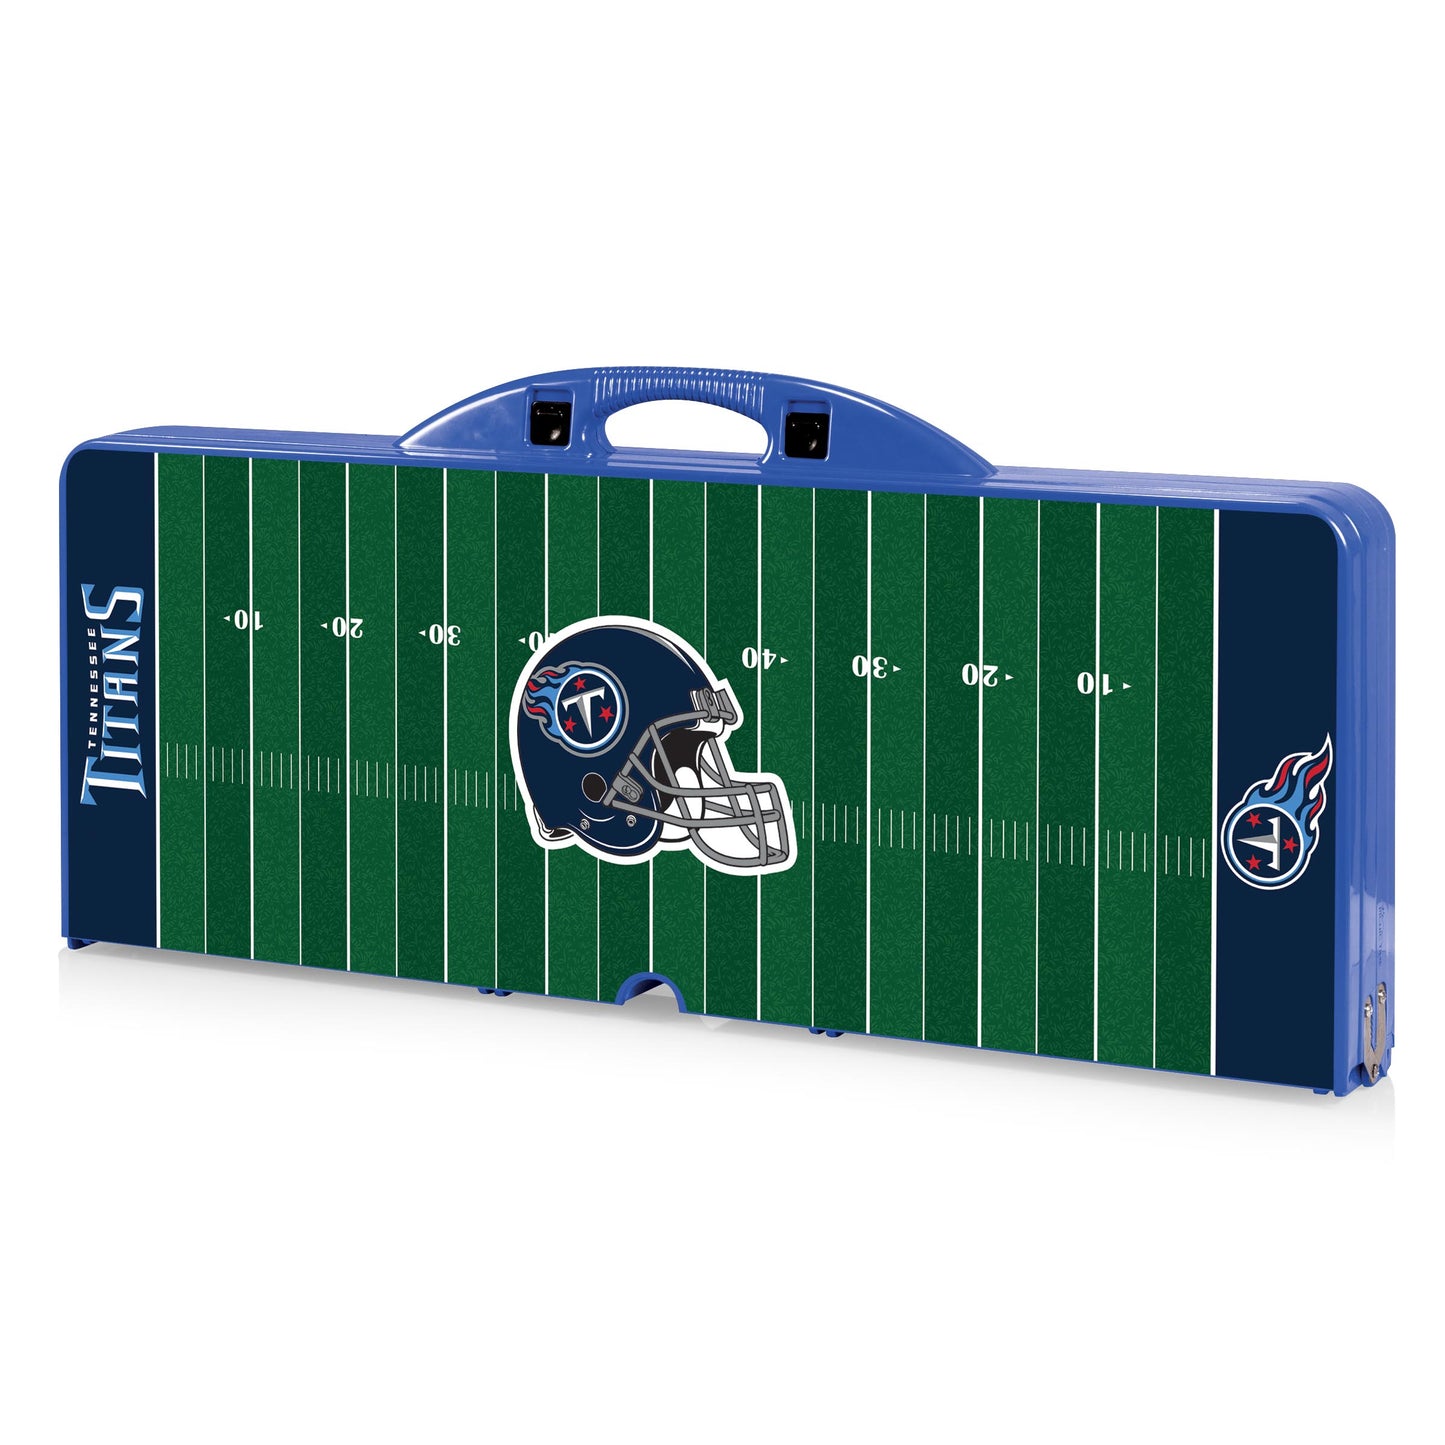 Tennessee Titans - Picnic Table Portable Folding Table with Seats and Umbrella